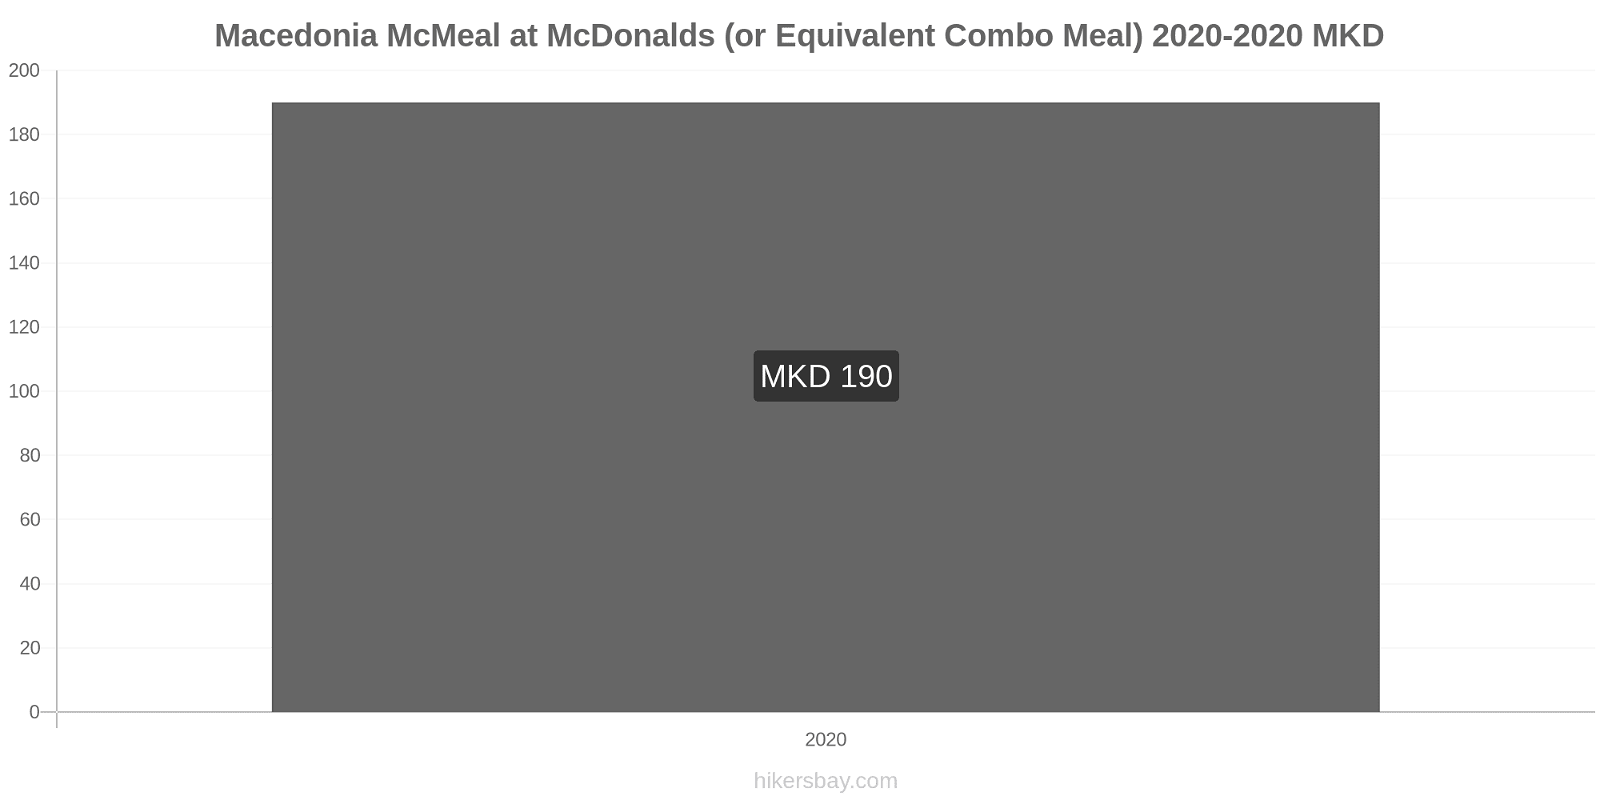 Macedonia price changes McMeal at McDonalds (or Equivalent Combo Meal) hikersbay.com